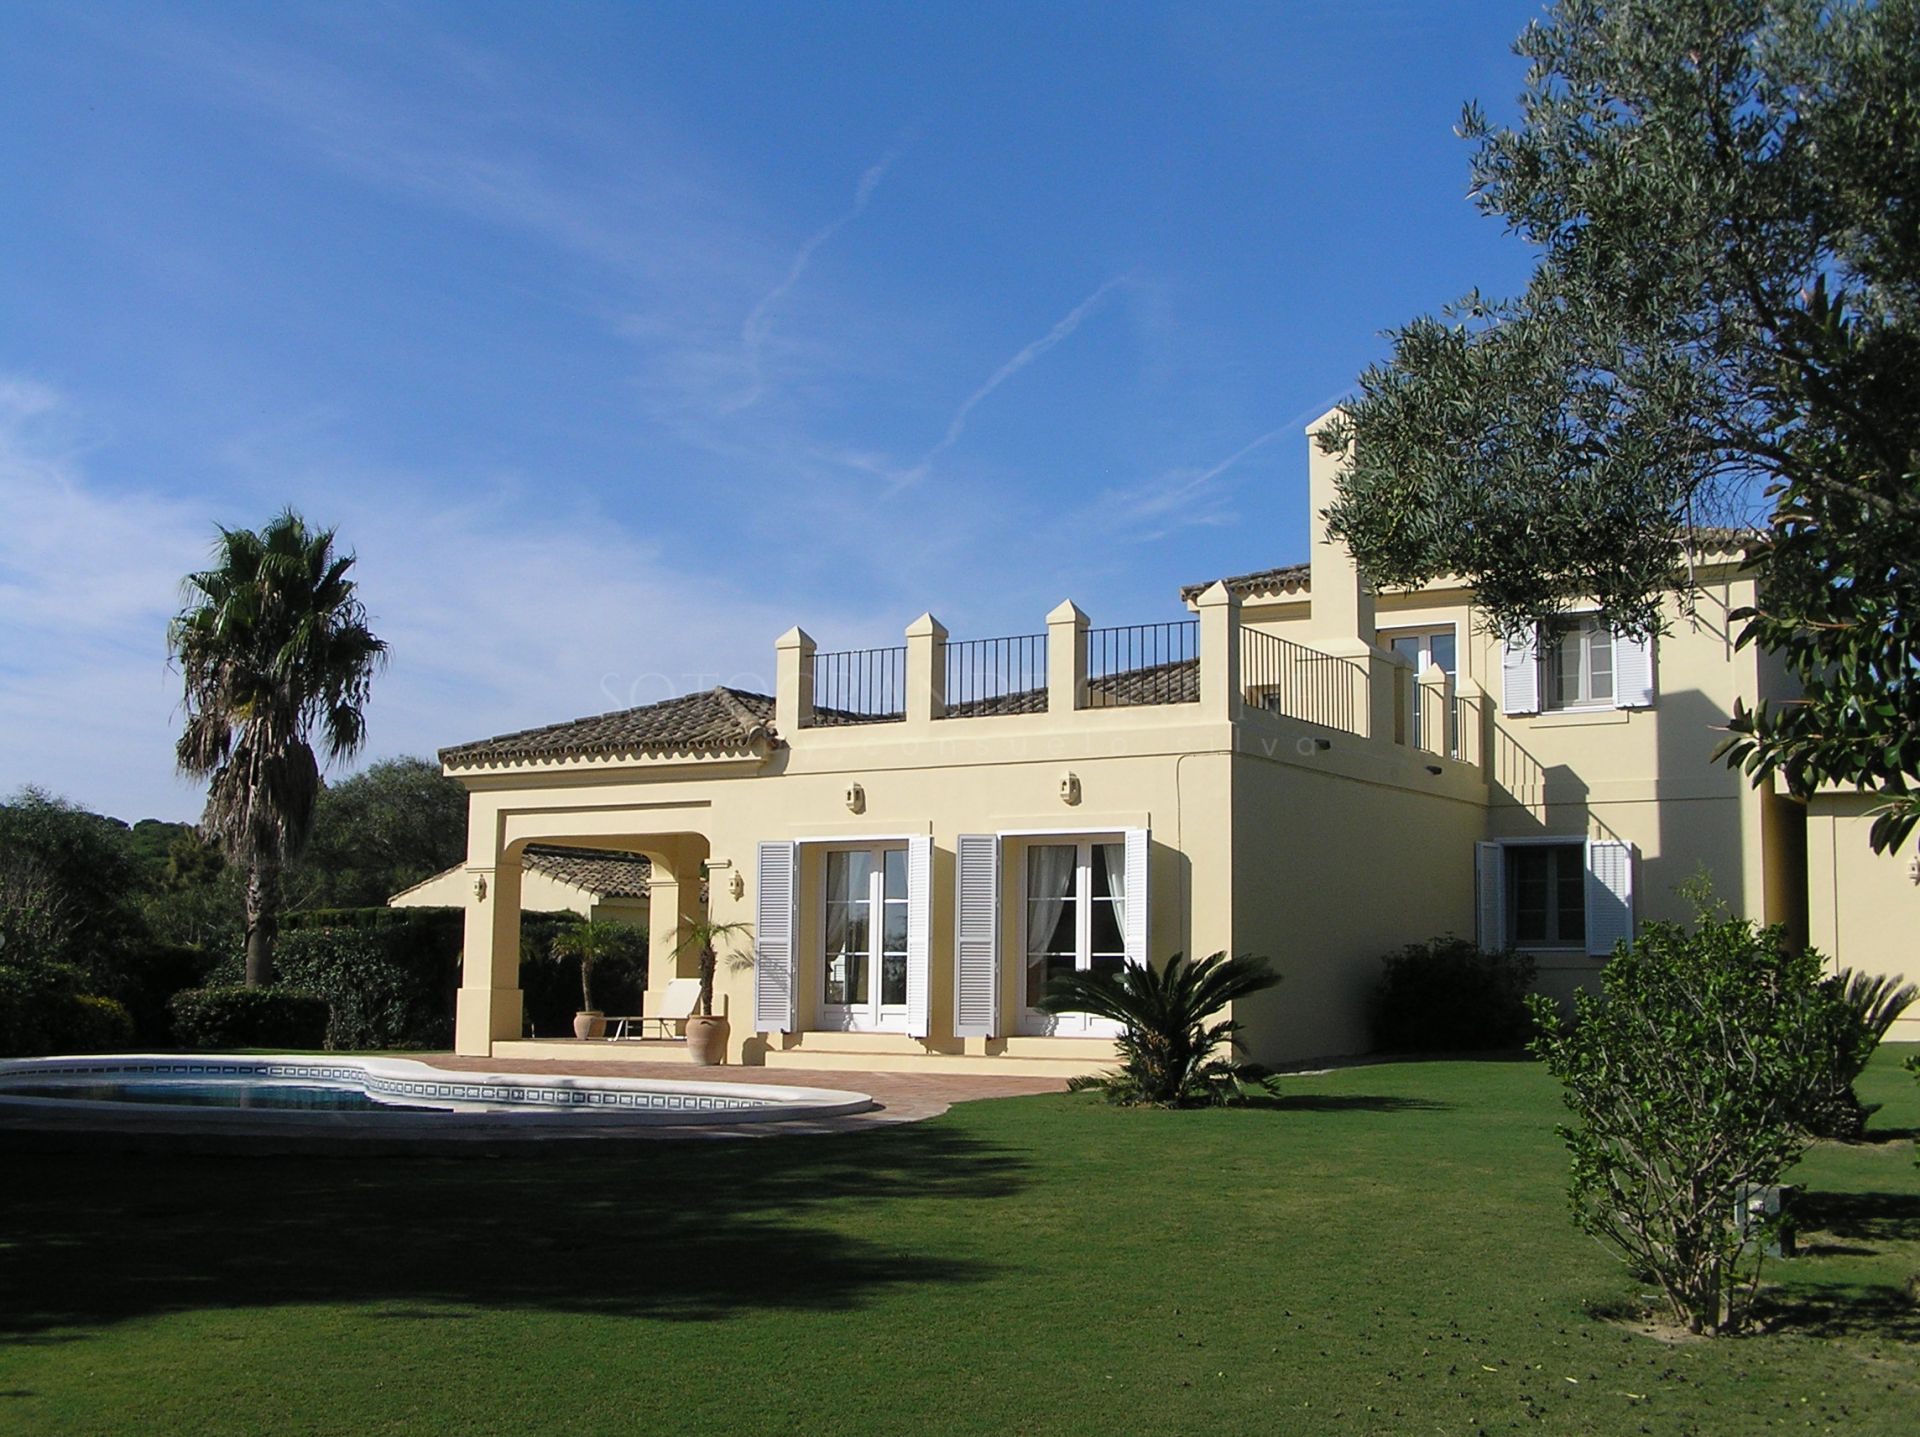 Sotogrande Alto, charming Villa with great views of the sea and golf